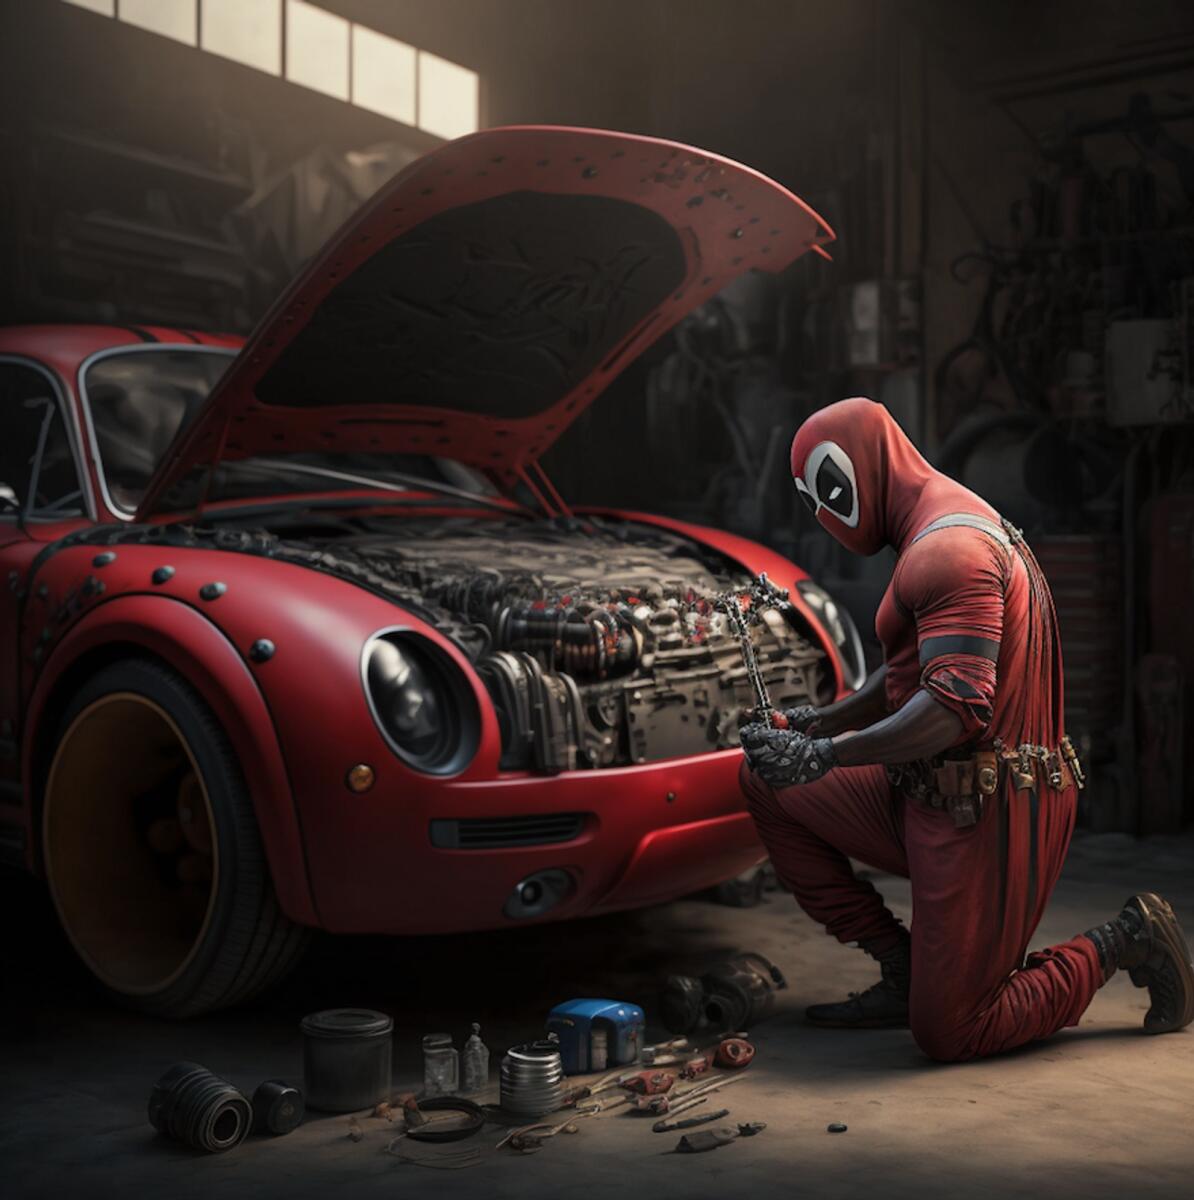 Deadpool working in an auto garage. All the AI artworks are created by Yohan Wadia using Midjourney